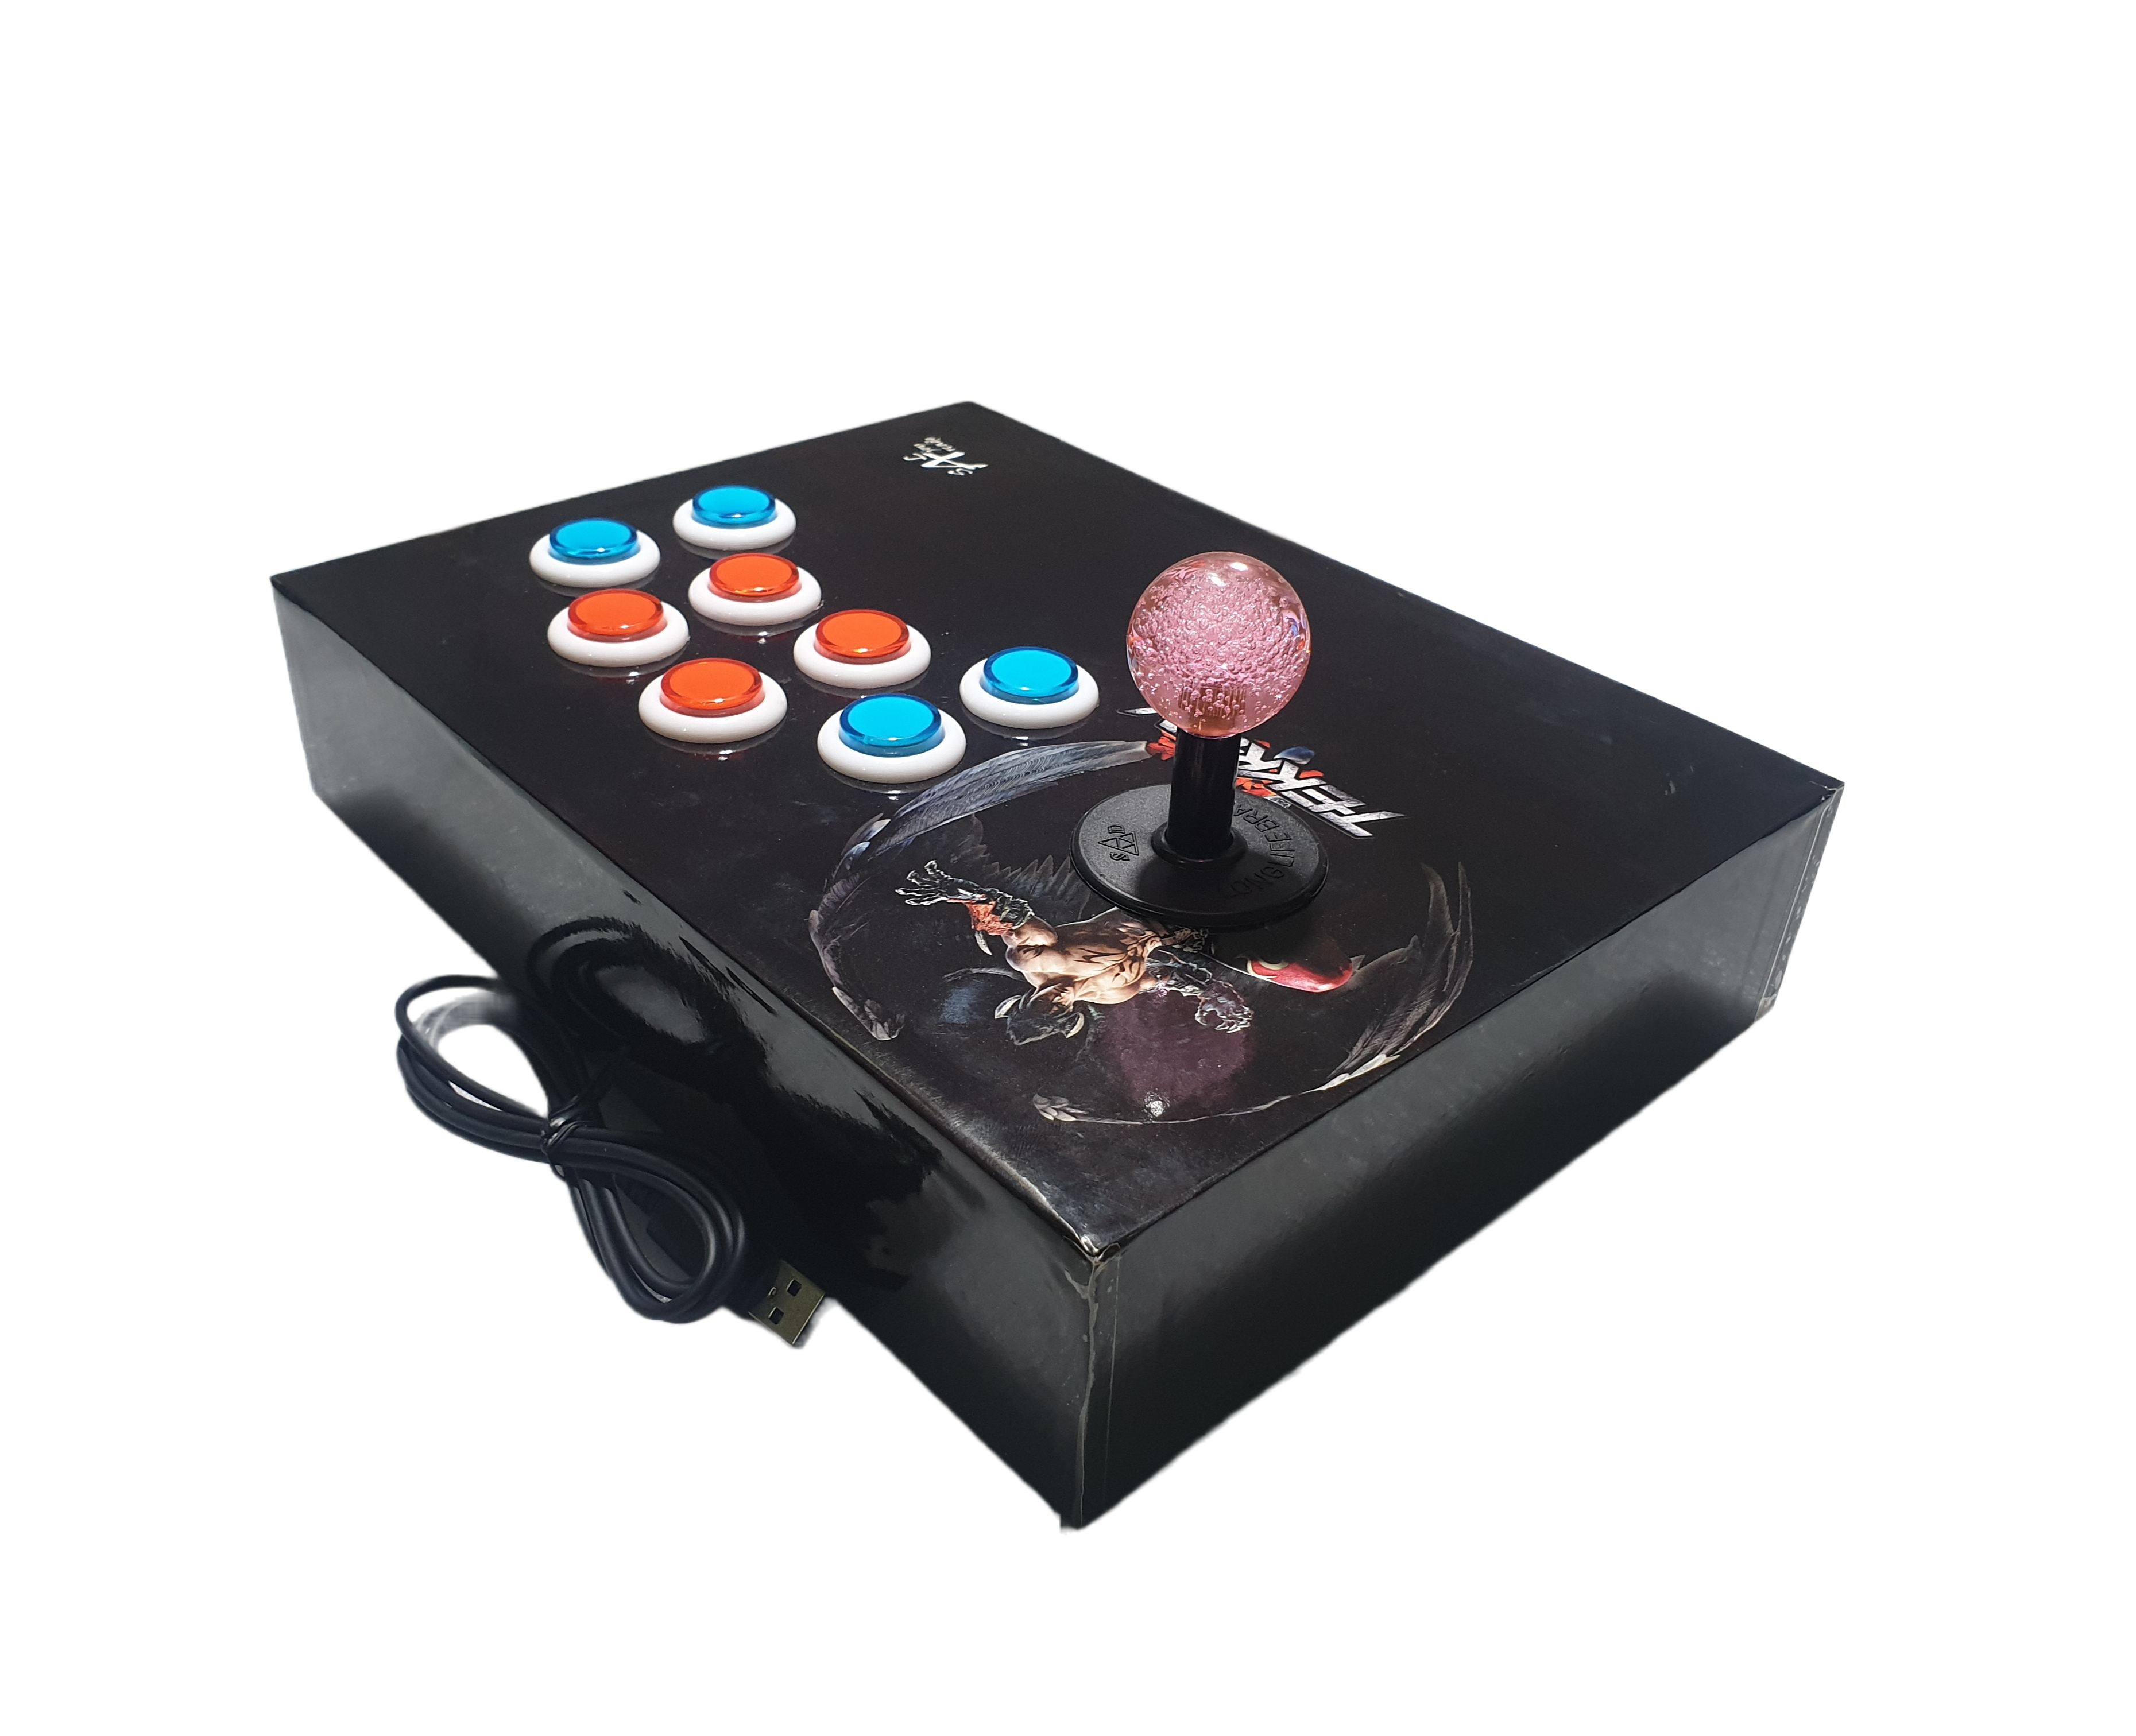 PC USB Arcade joystick for PS3, PC Windows and Android Mobiles